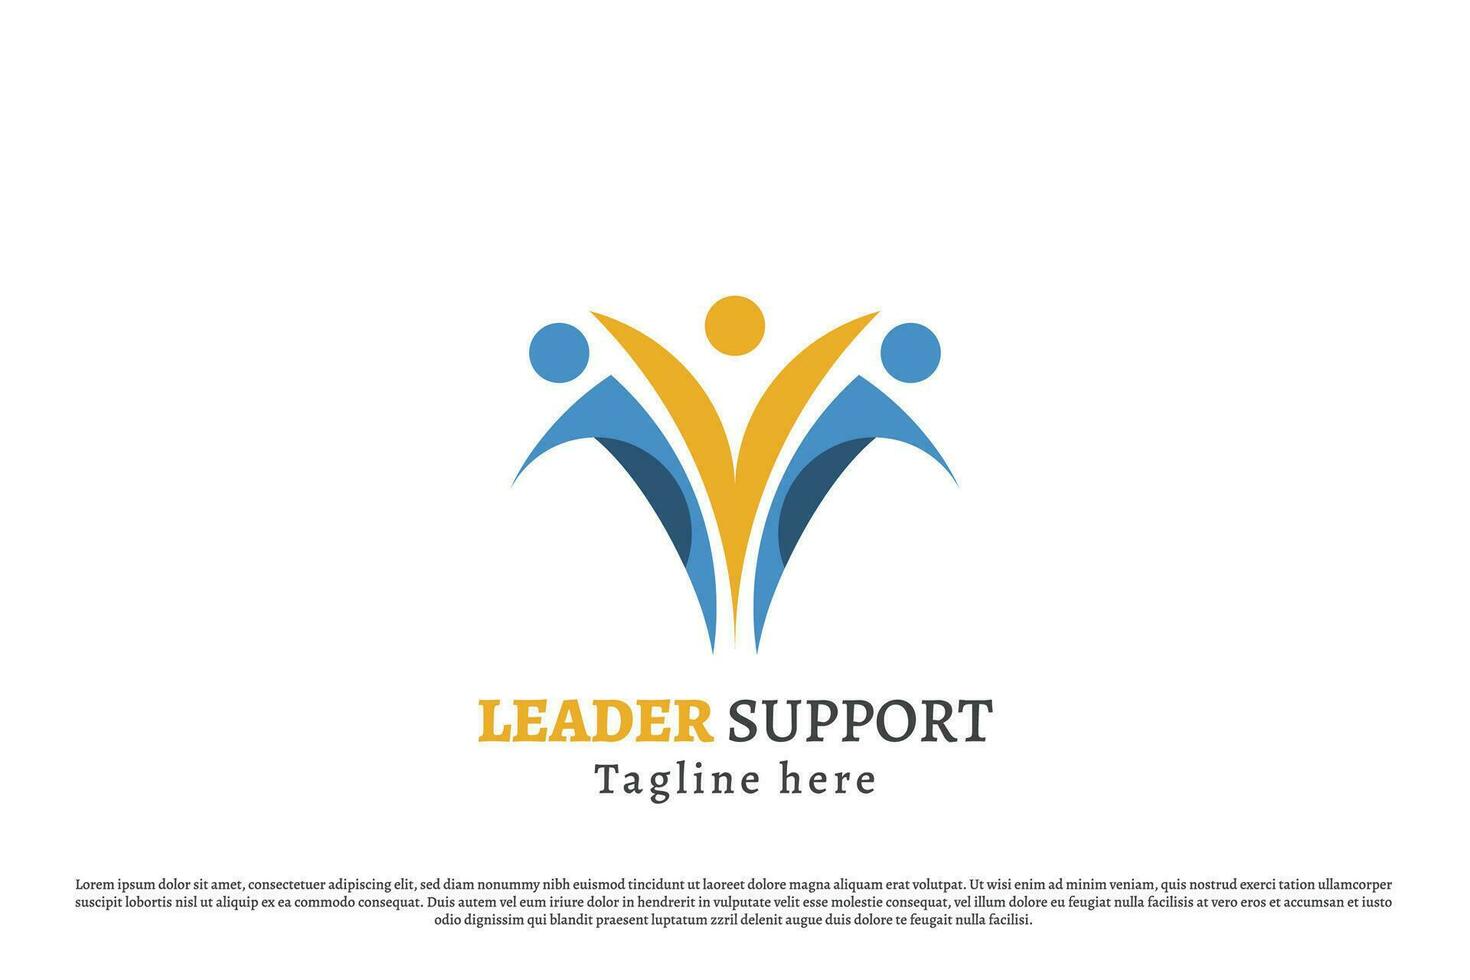 Leader support logo design illustration. Silhouettes of people office workers company leaders boss supervisor managers working team cooperation. Modern minimalist simple people financial business icon vector